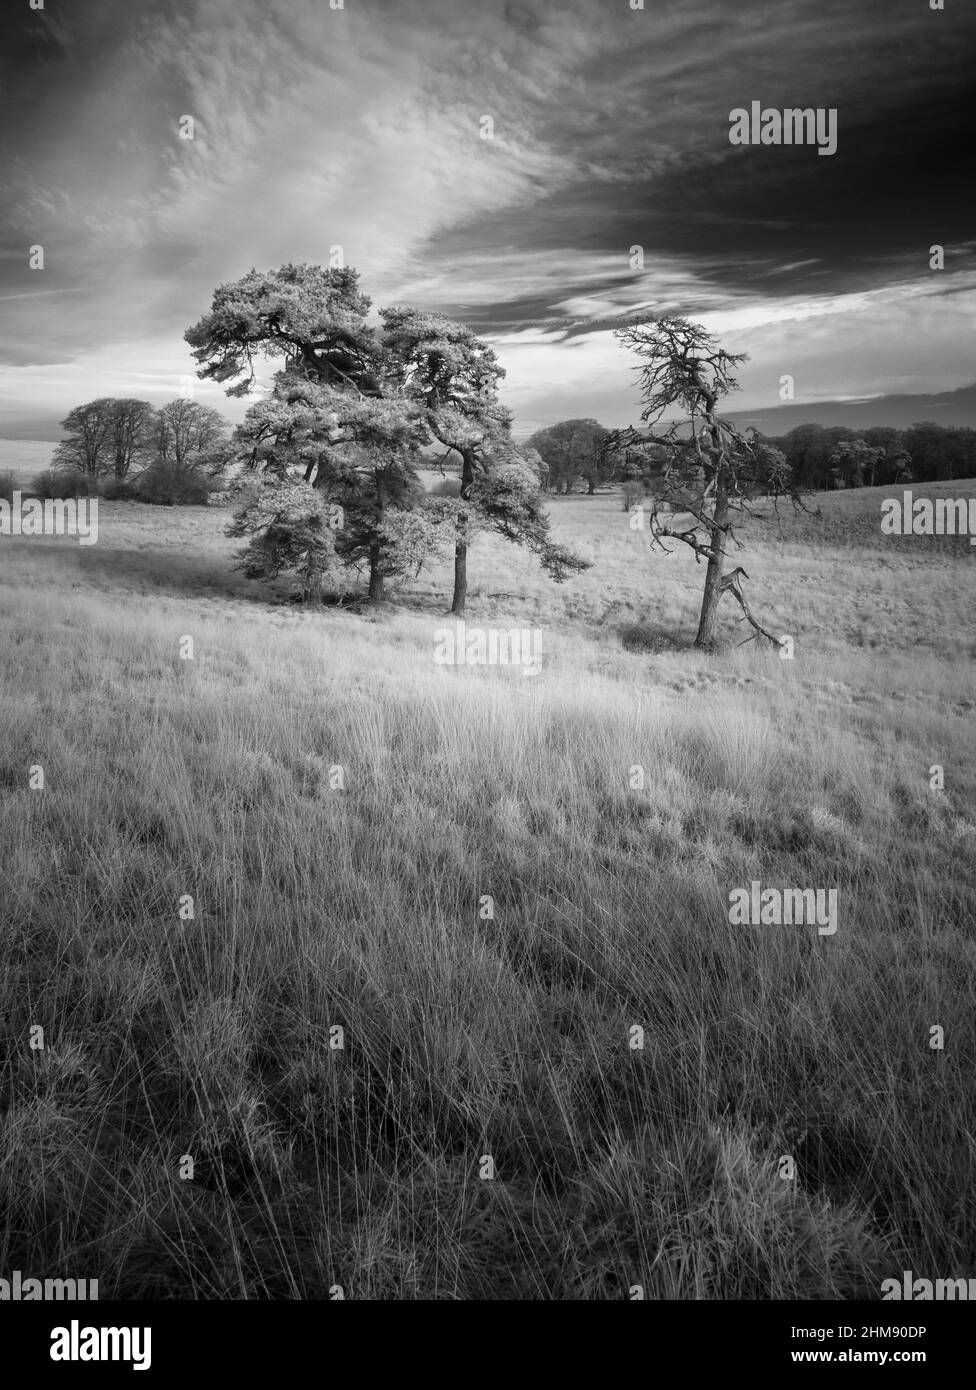 An infrared image of Scots pine trees in the old mining landscape of Priddy Mineries in the Mendip Hills National Landscape, Somerset, England. Stock Photo